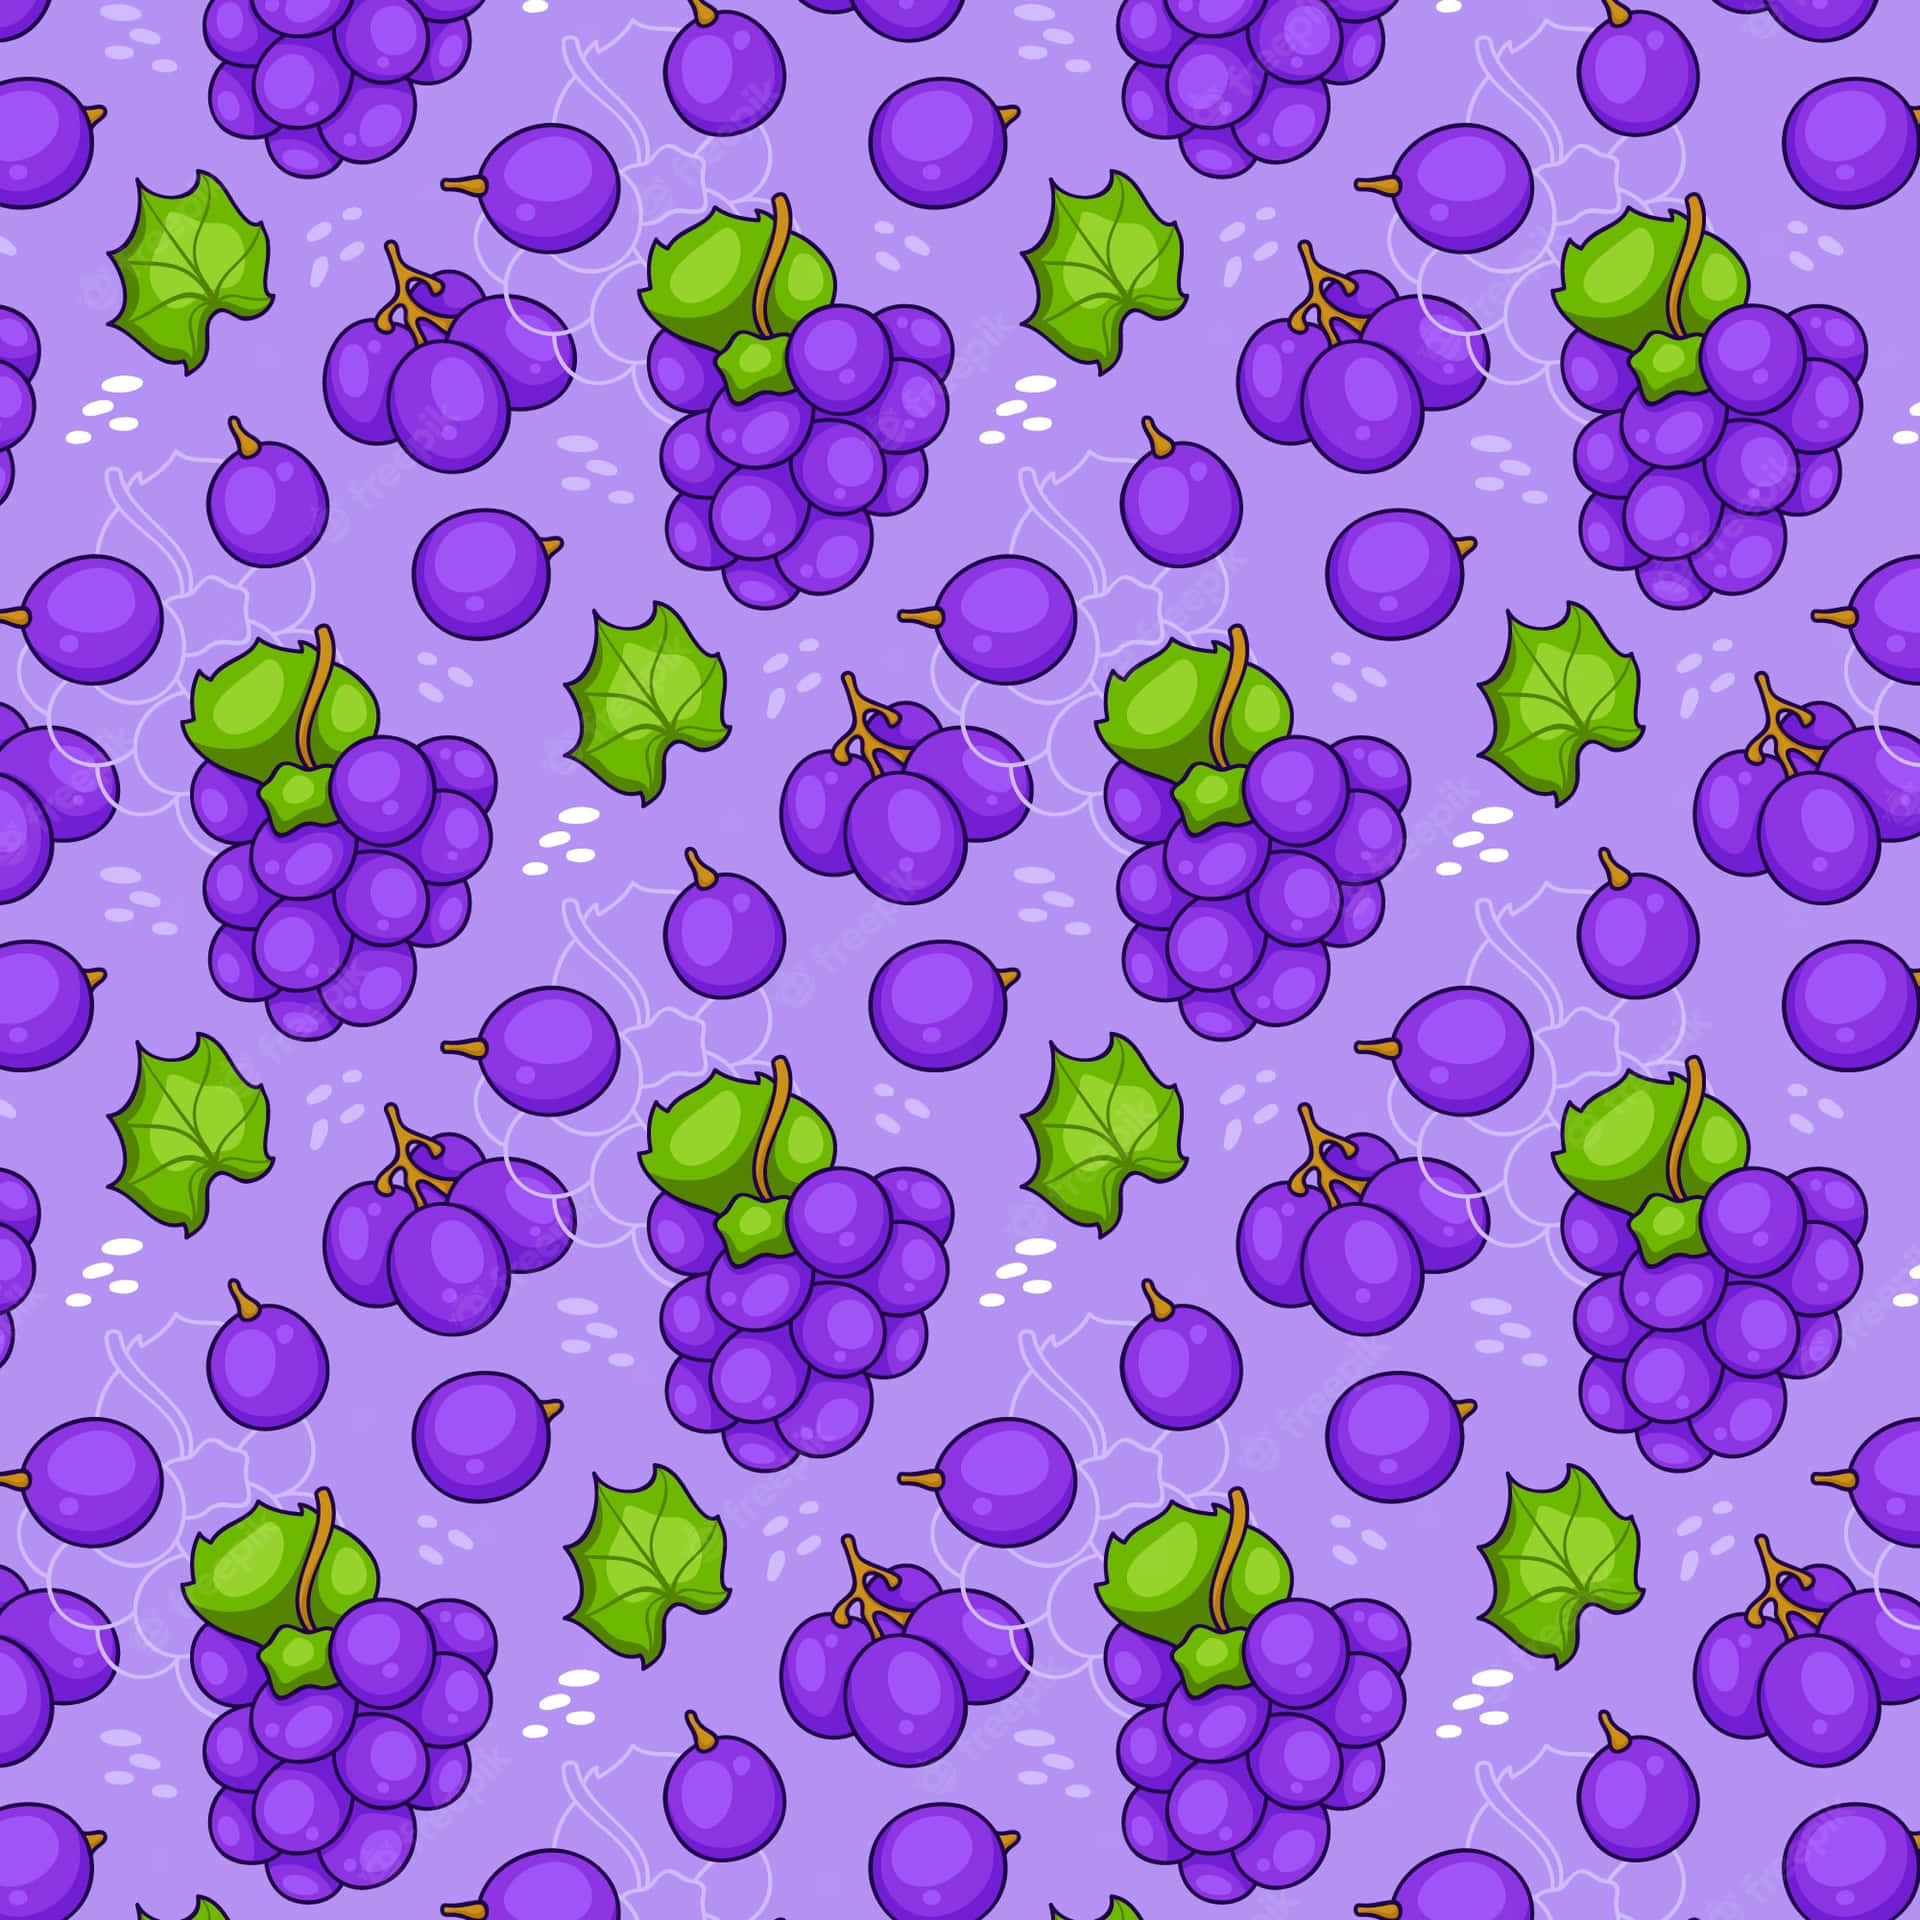 Fresh bunch of grapes on a vibrant background